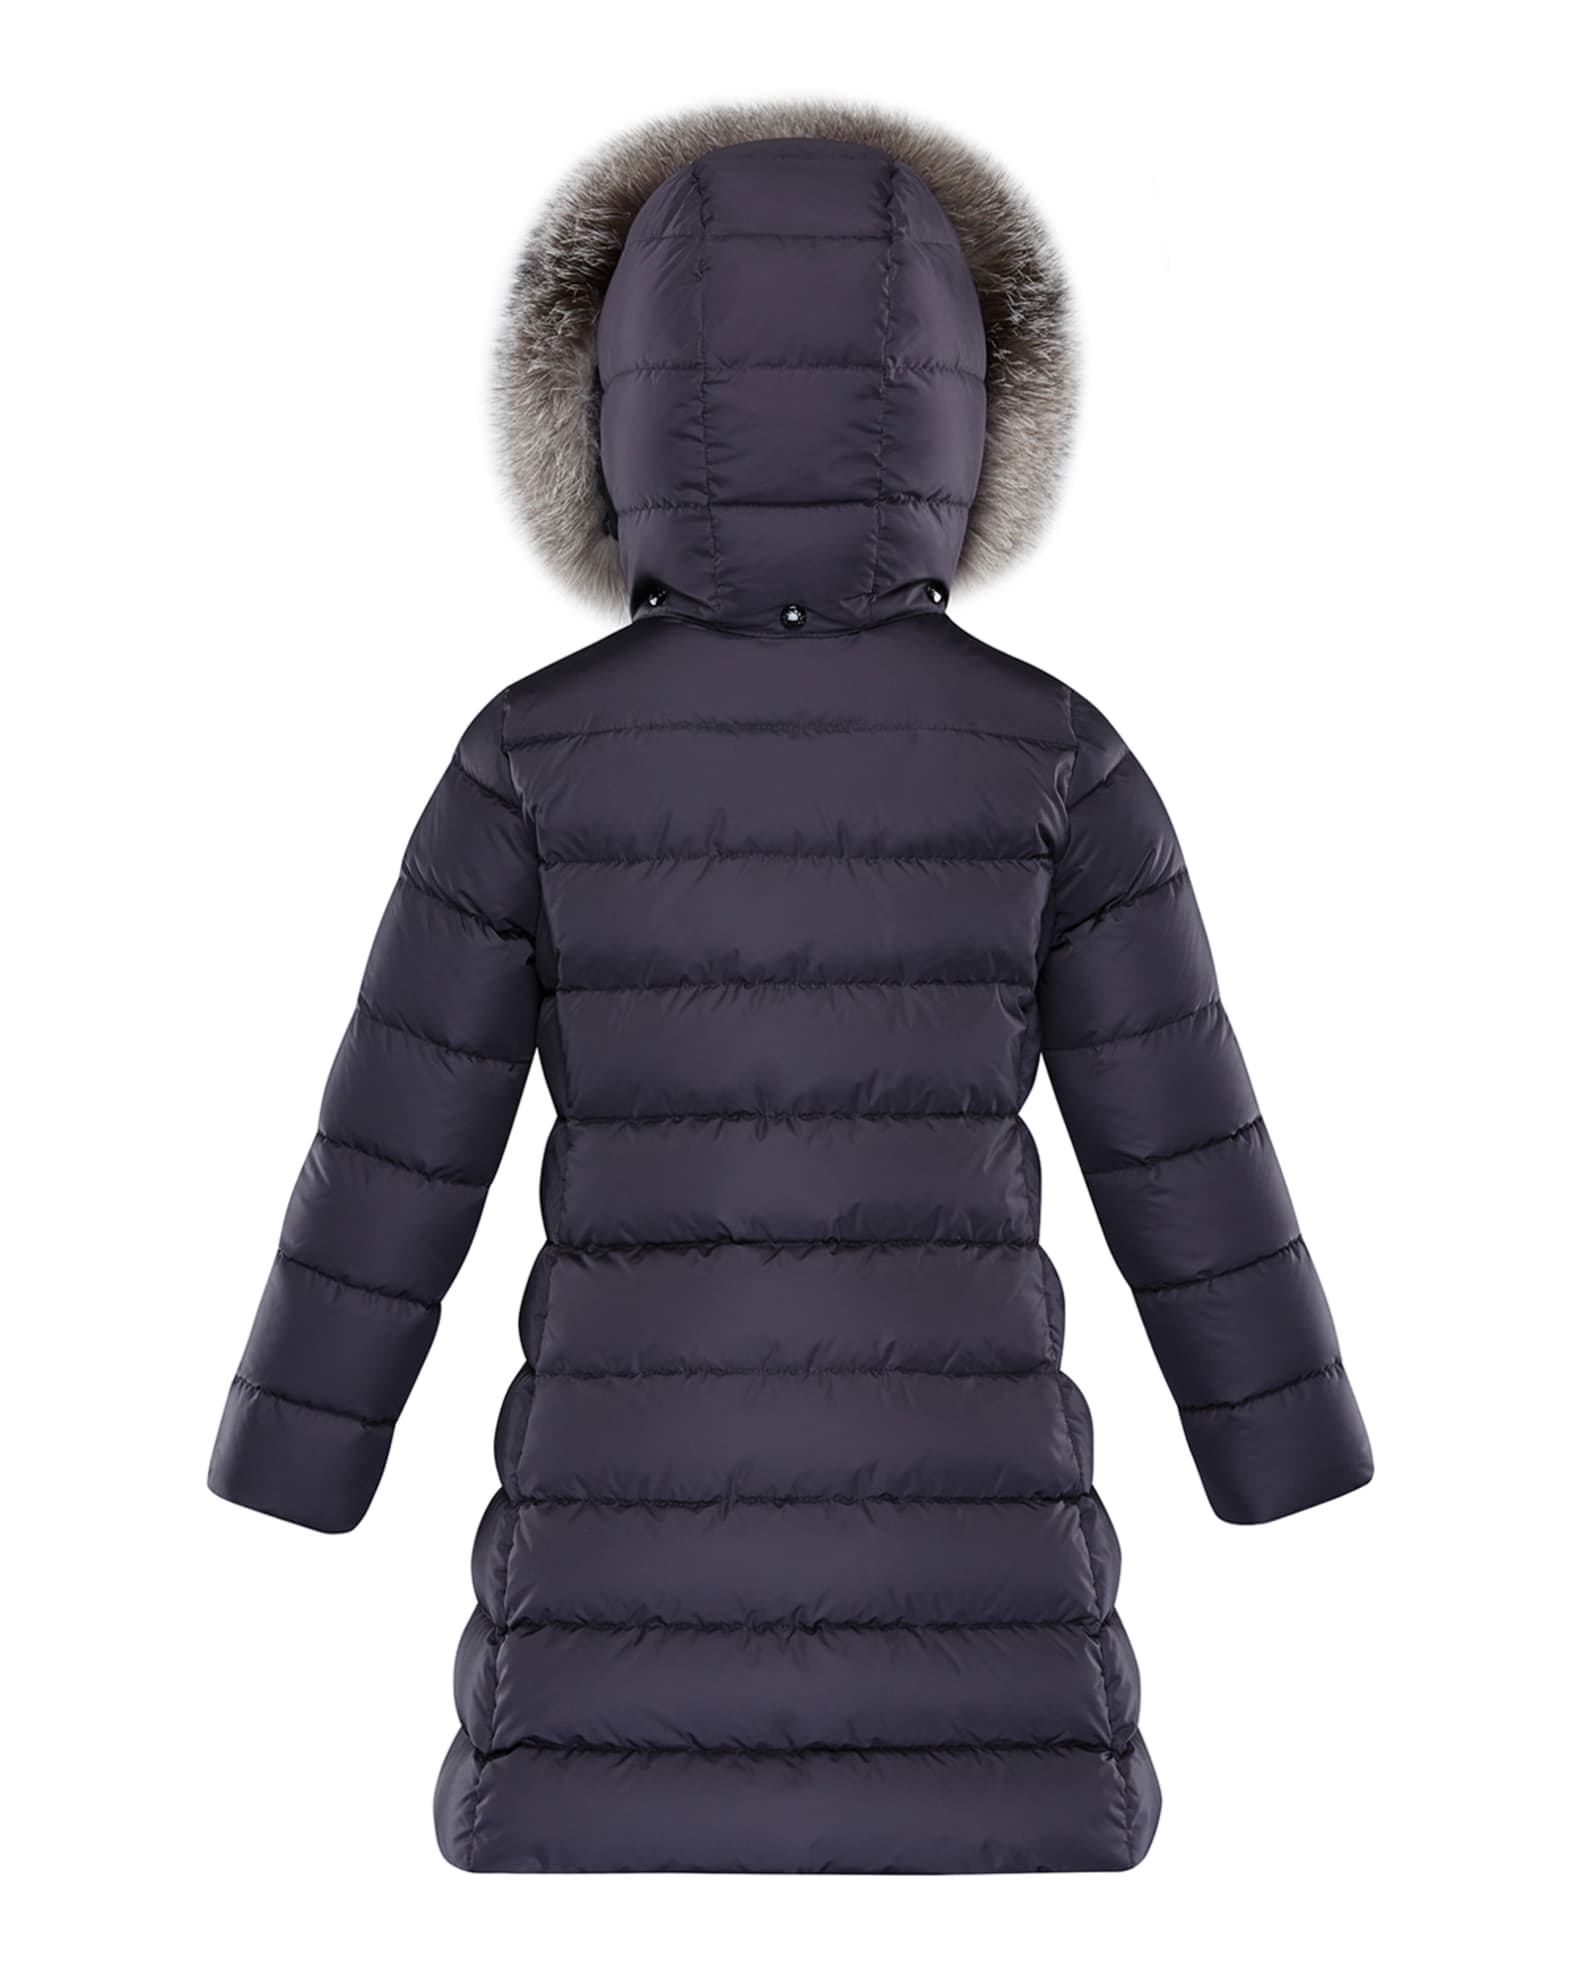 New ladies Padded Jacket With Detachable Fur Collar coat top 8-14 